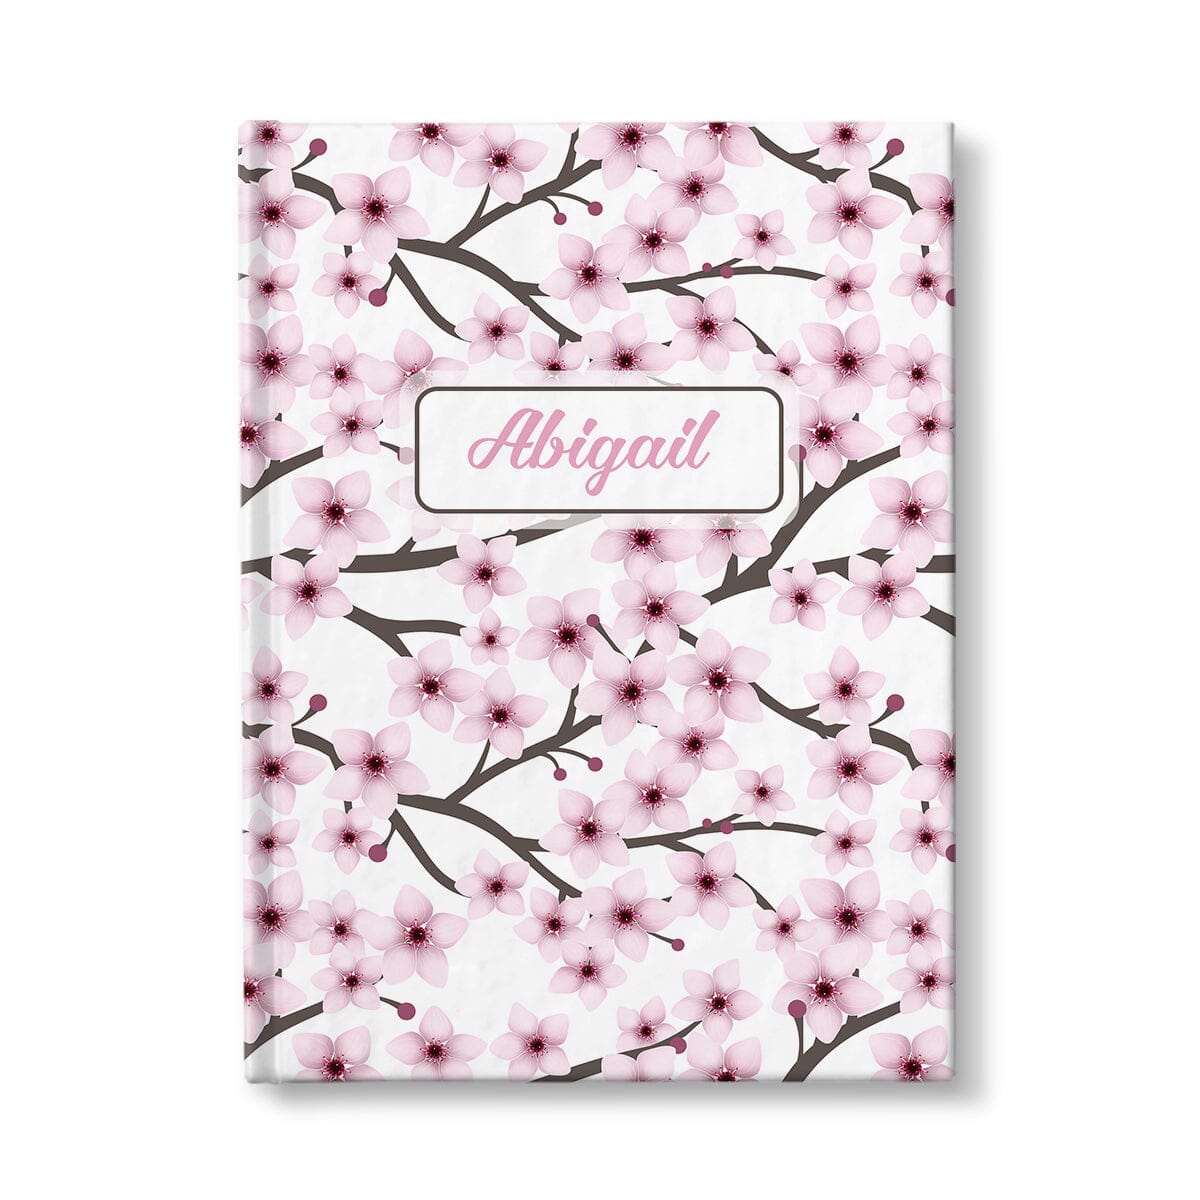 Personalized Cherry Blossom Journal at Artistically Invited.